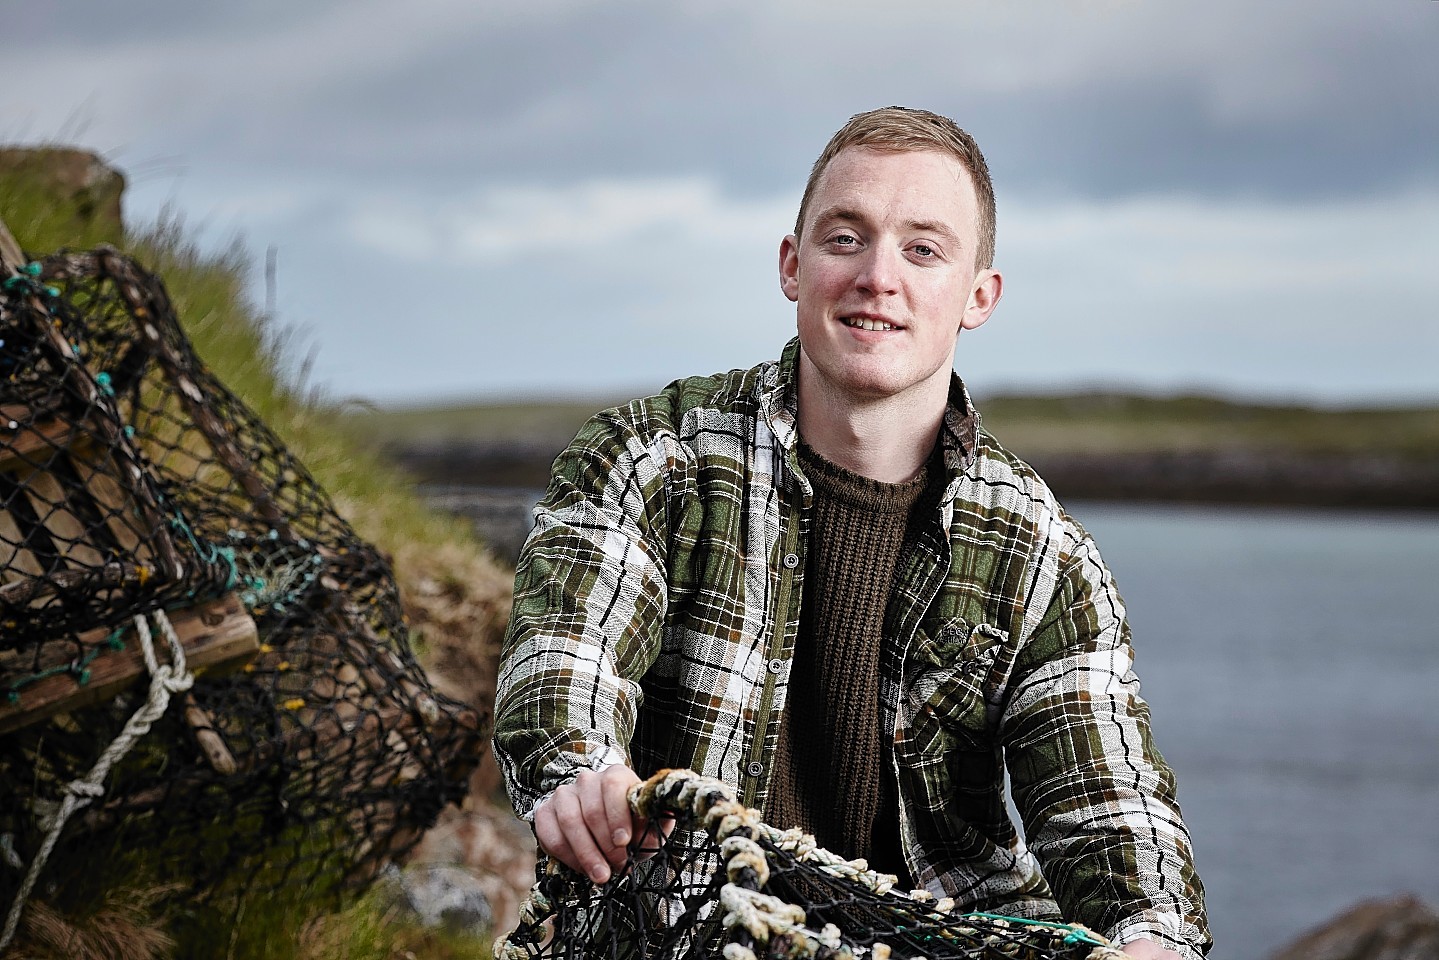 Douglas Stewart's Hebridean Food Co was among the winners at the Scottish EDGE Awards.